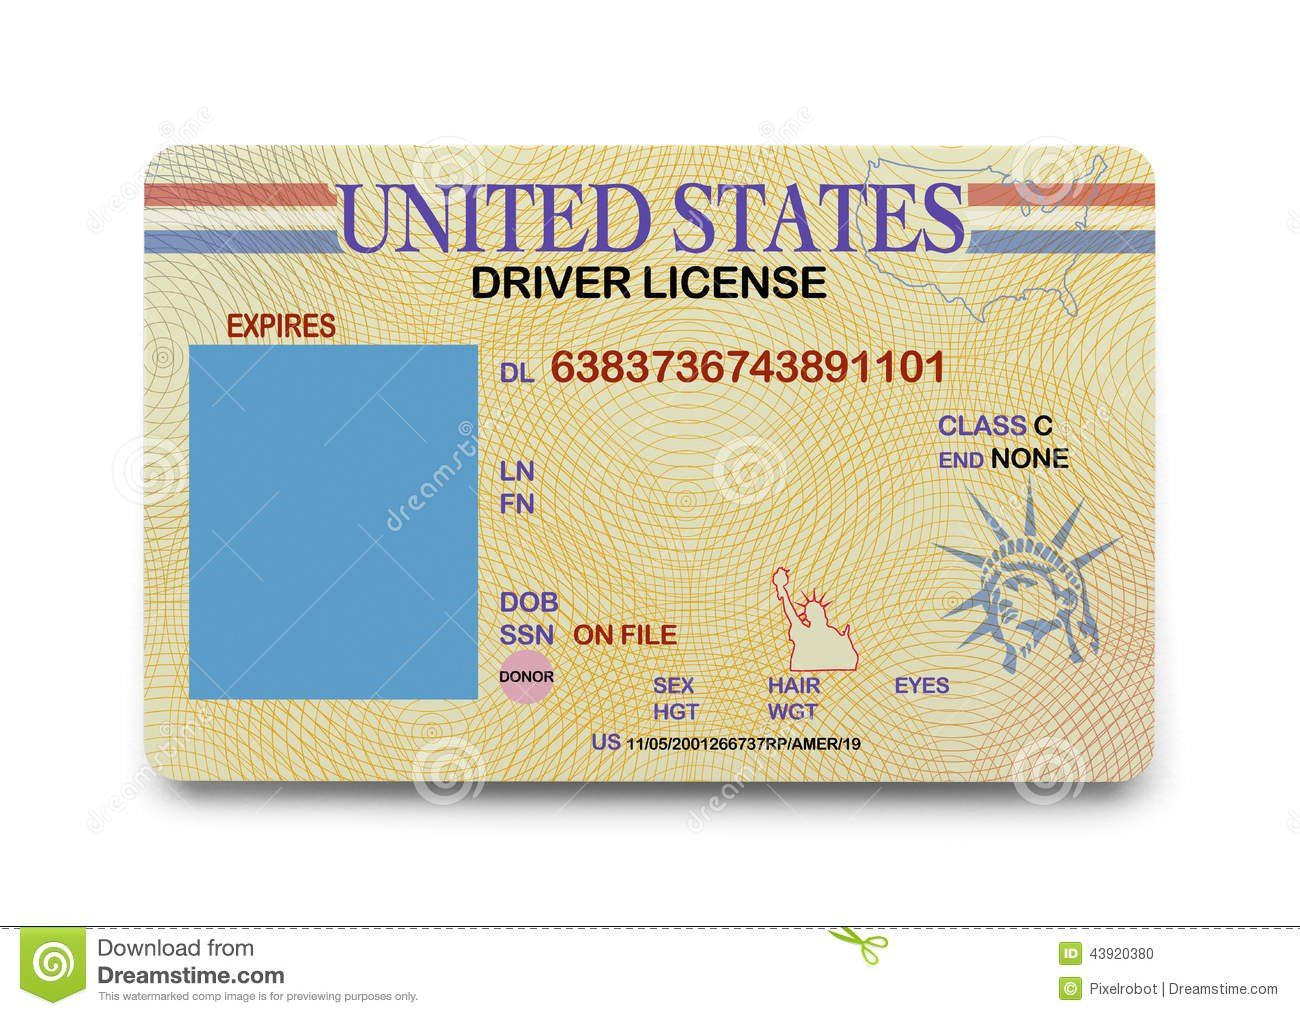 Blank Drivers License Template Psd Images  North Carolina Drivers throughout Blank Drivers License Template